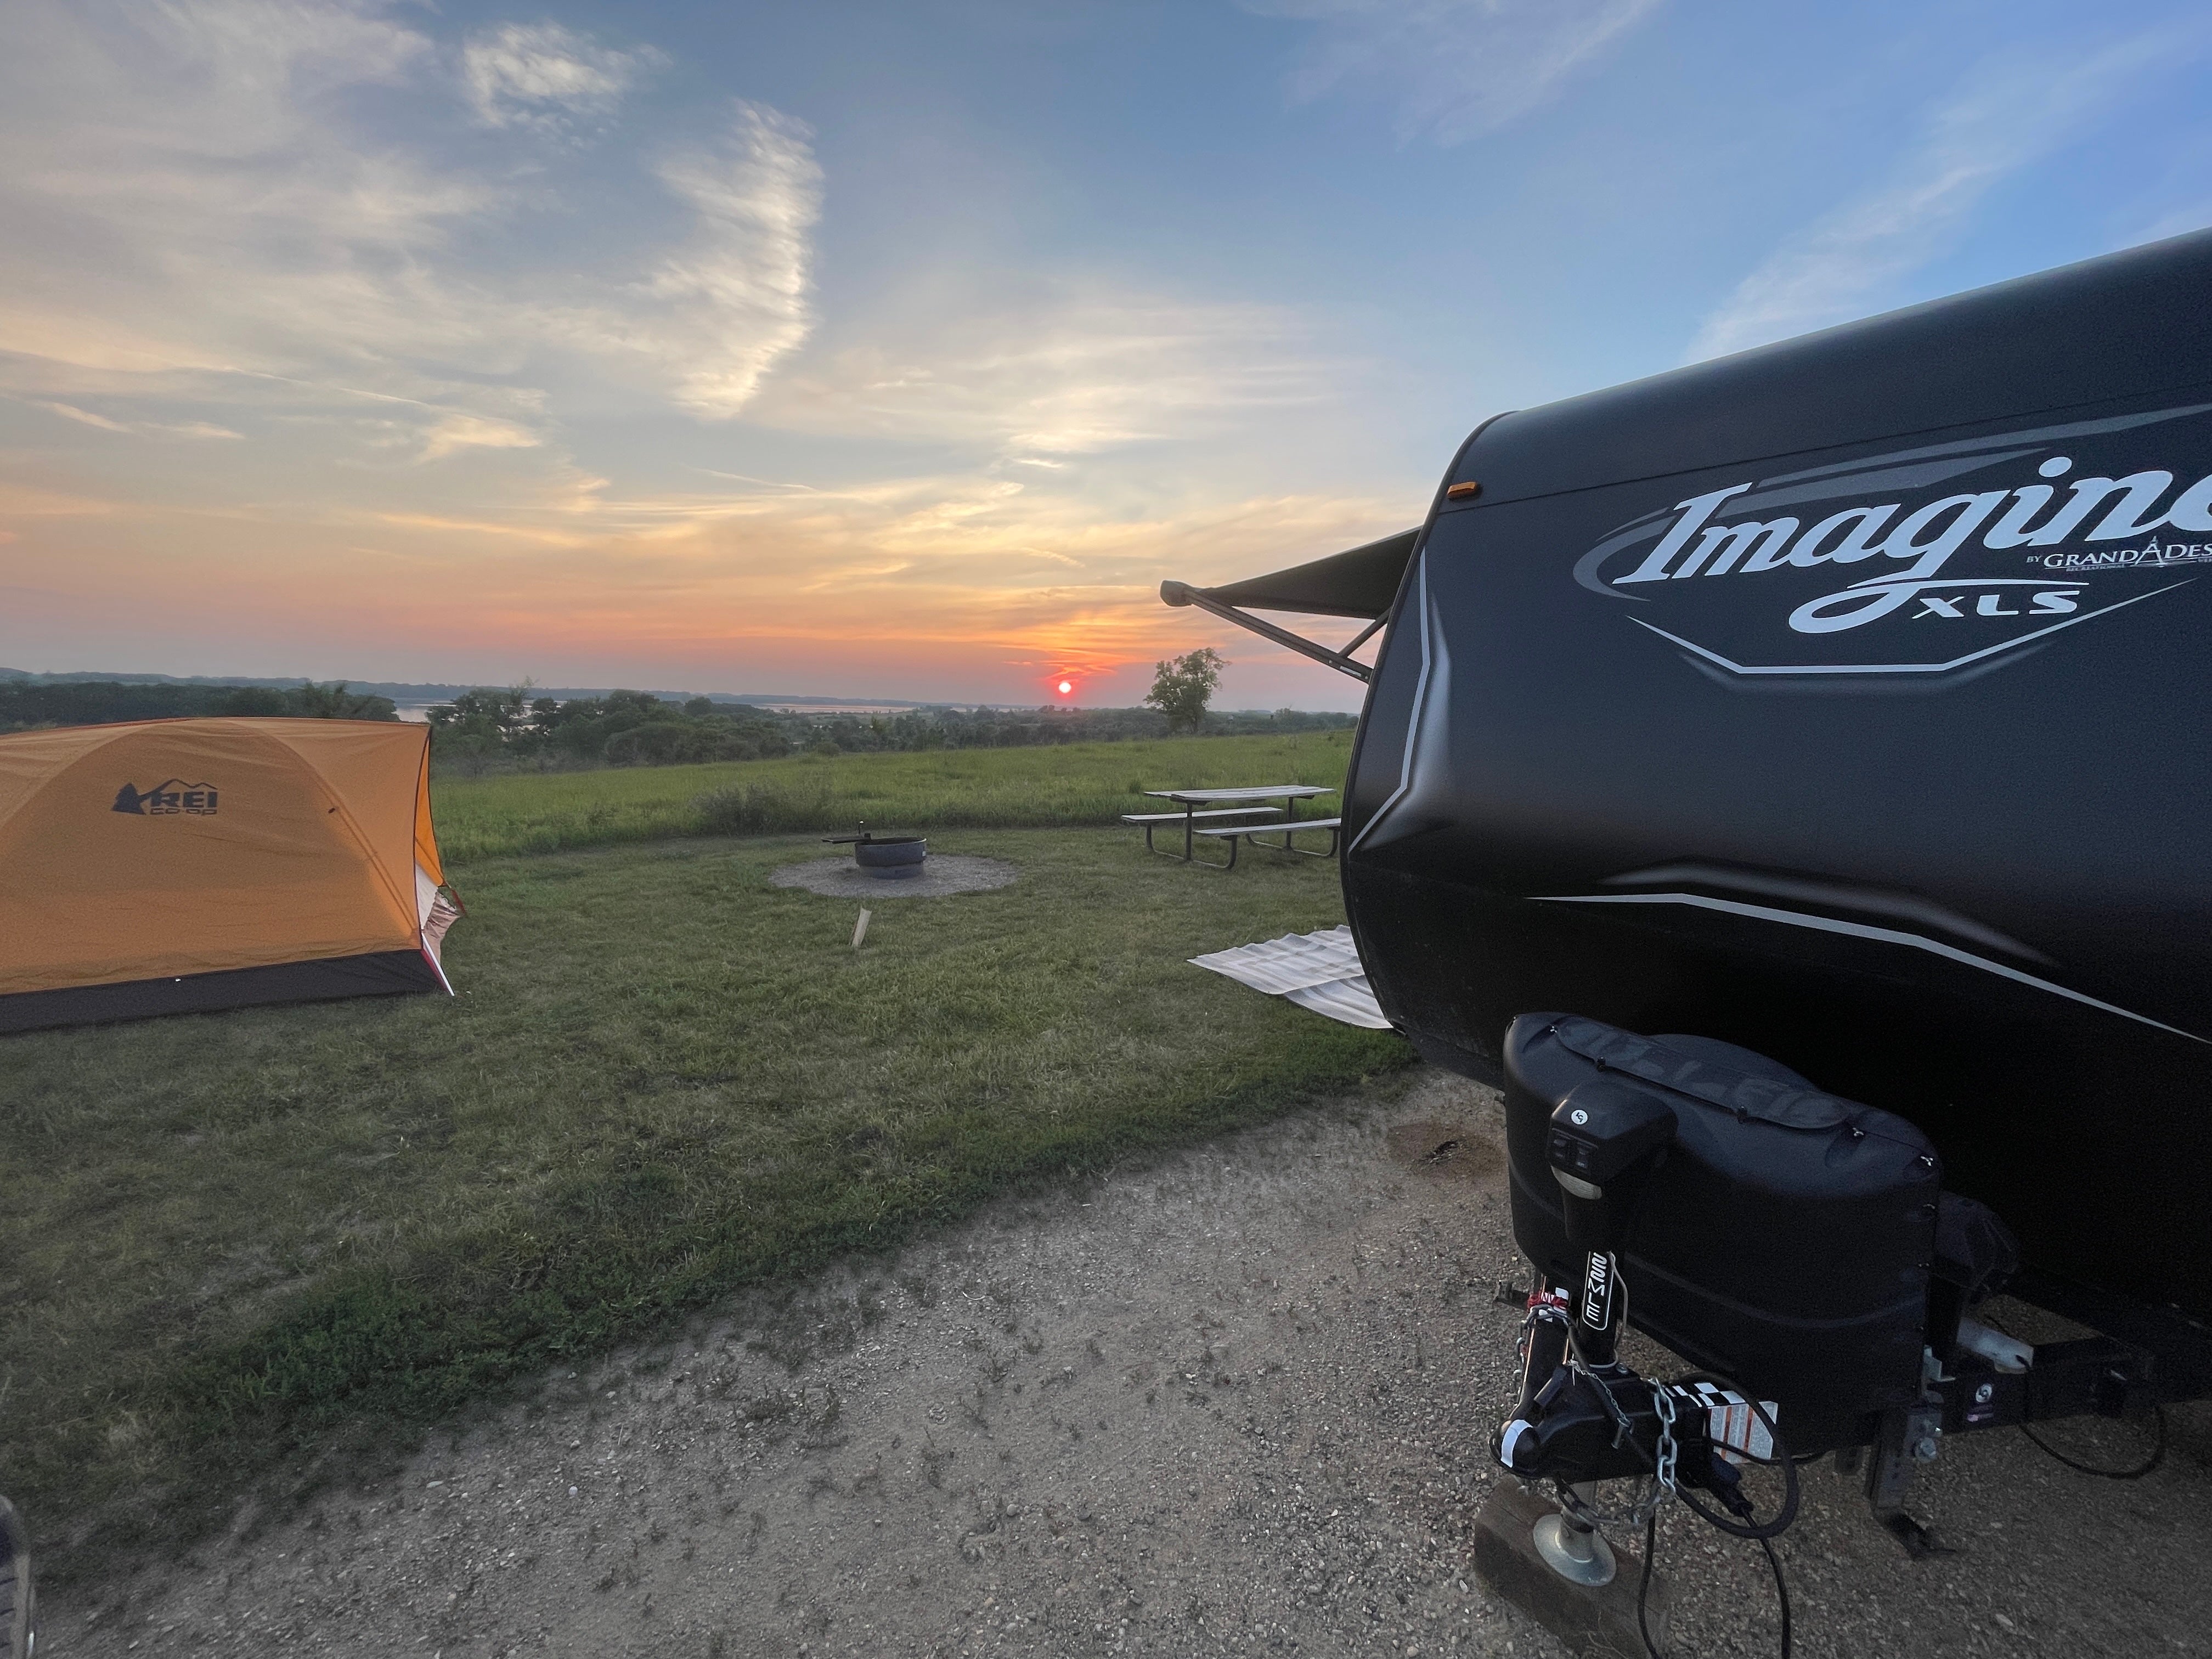 Camper submitted image from Lac qui parle county park - 3